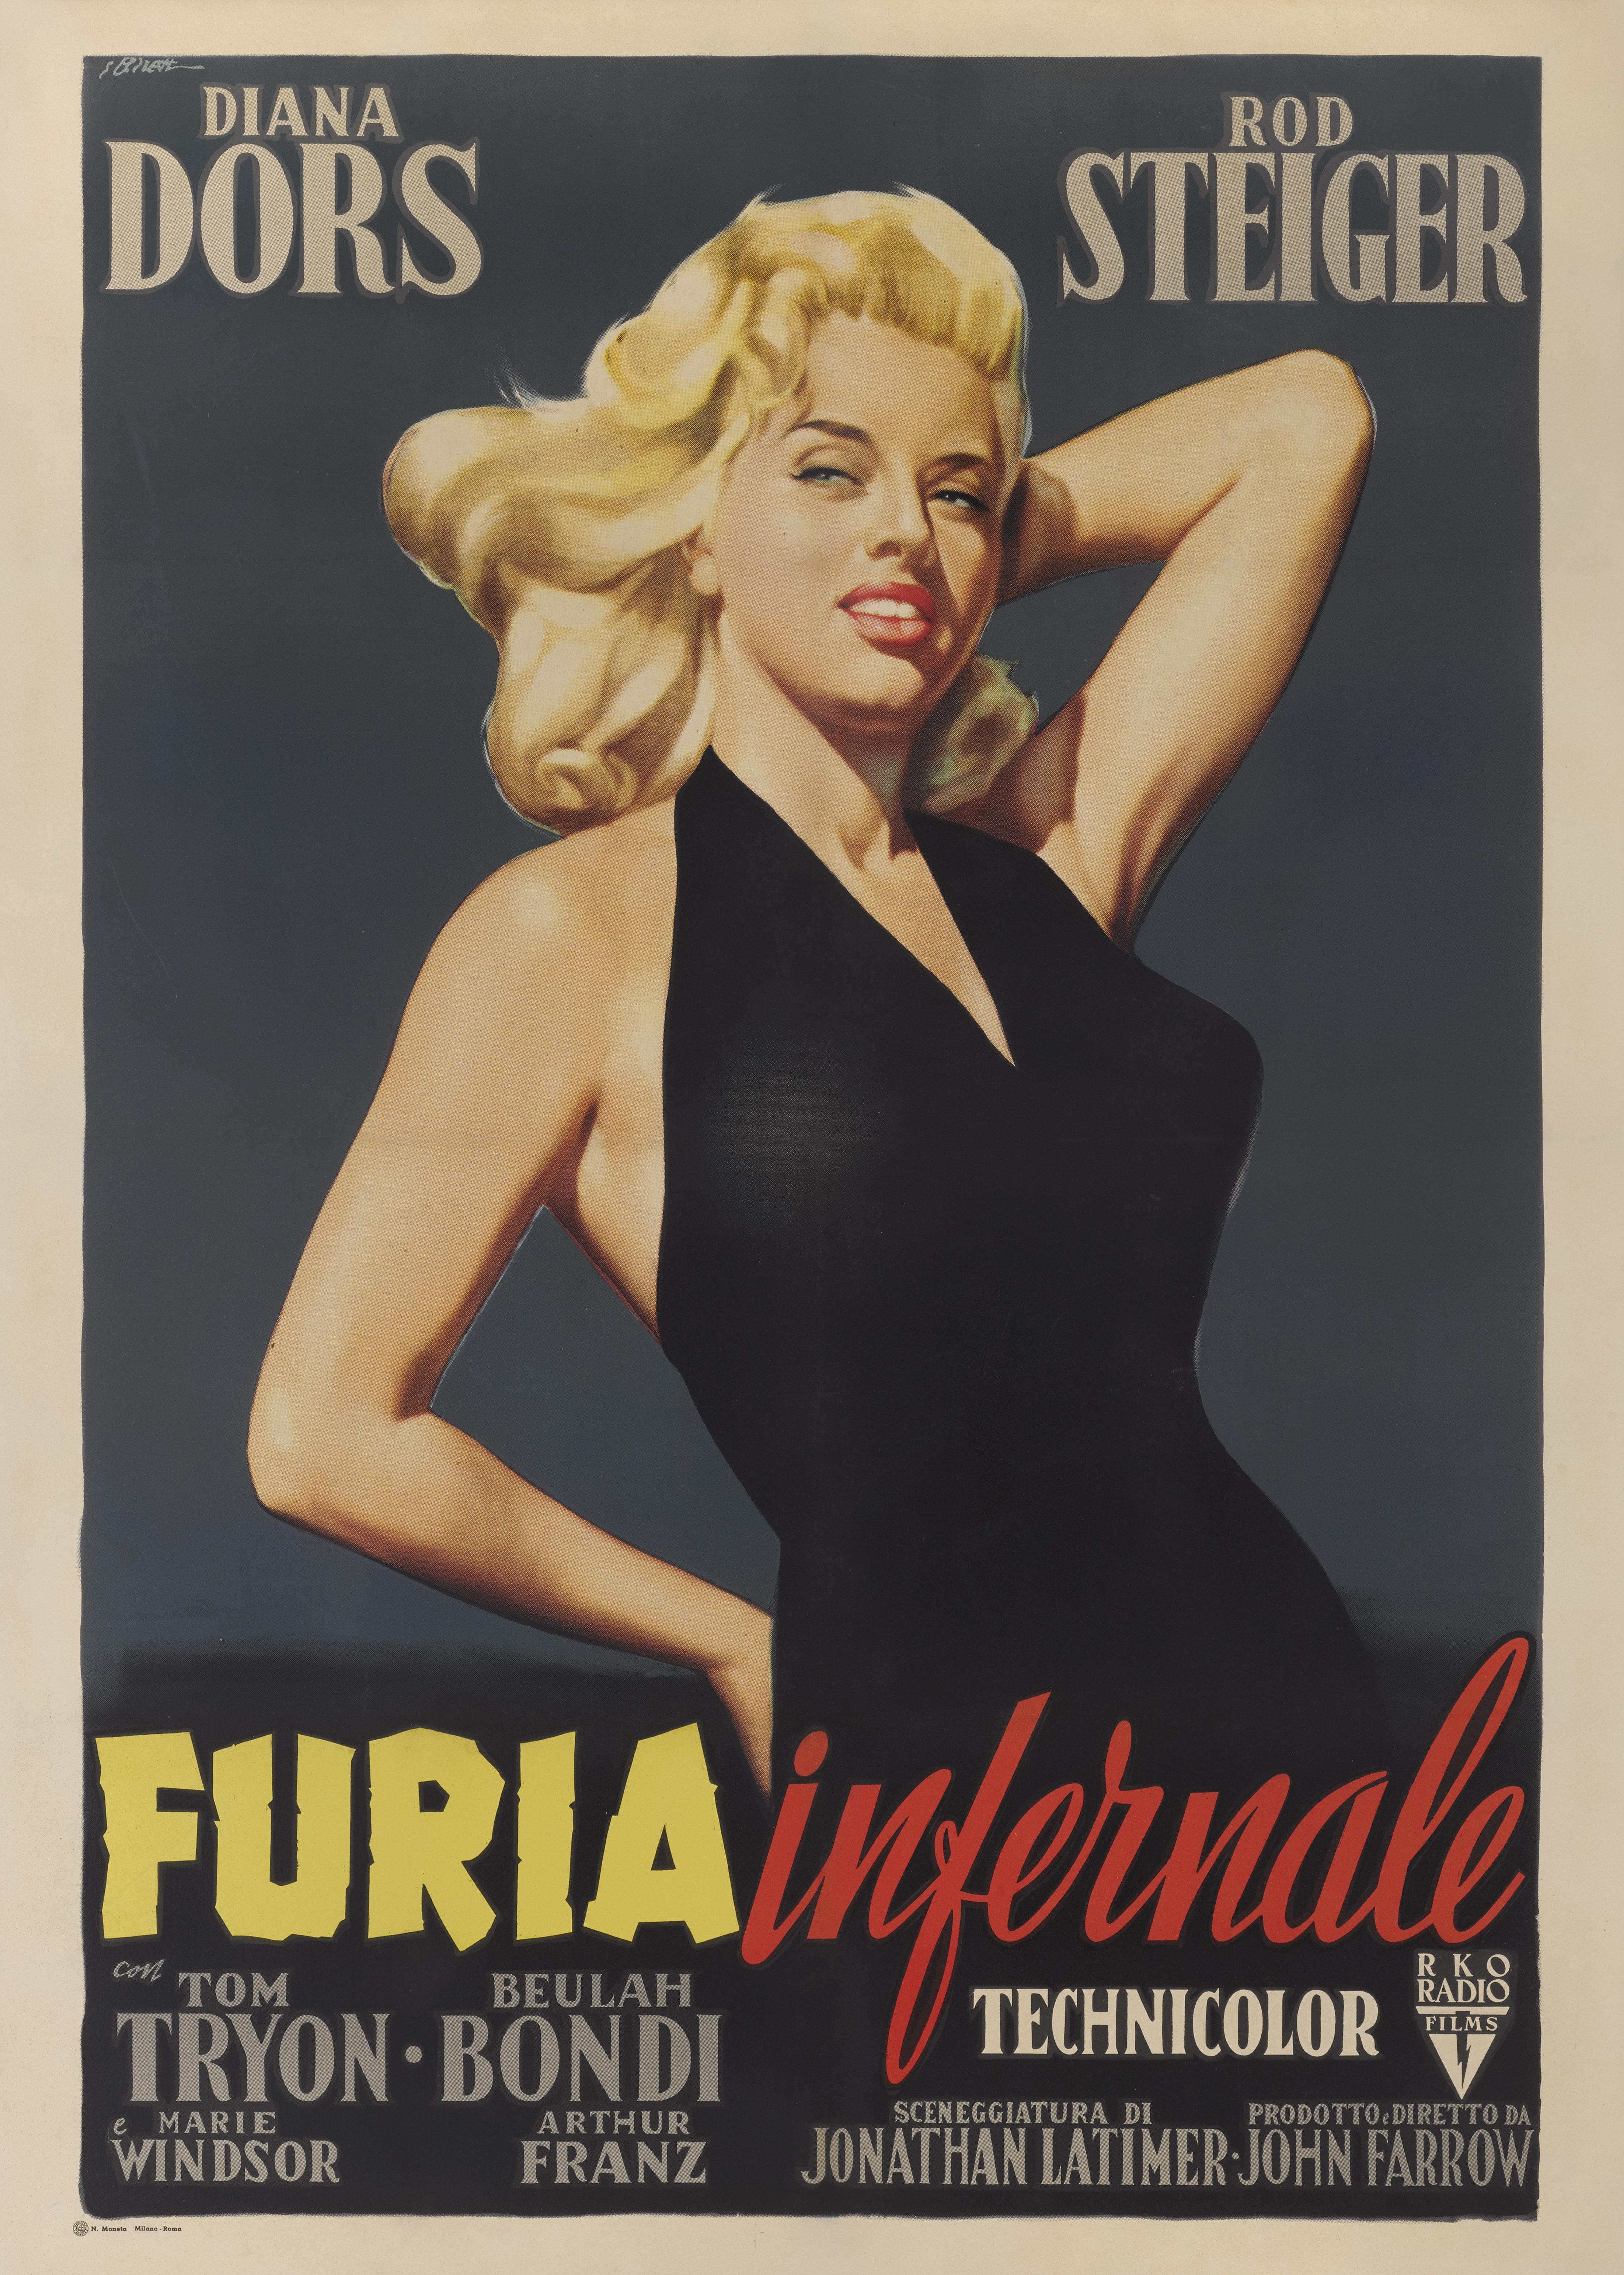 Original Italian film poster for The Unholy Wife 1957.
This film noir was directed and produced by John Farrow, and stars Diana Dors, Rod Steiger, Tom Tryon and Beulah Bondi. Dors plays Phyllis Hochen, a gold-digger who cheats on her wealthy